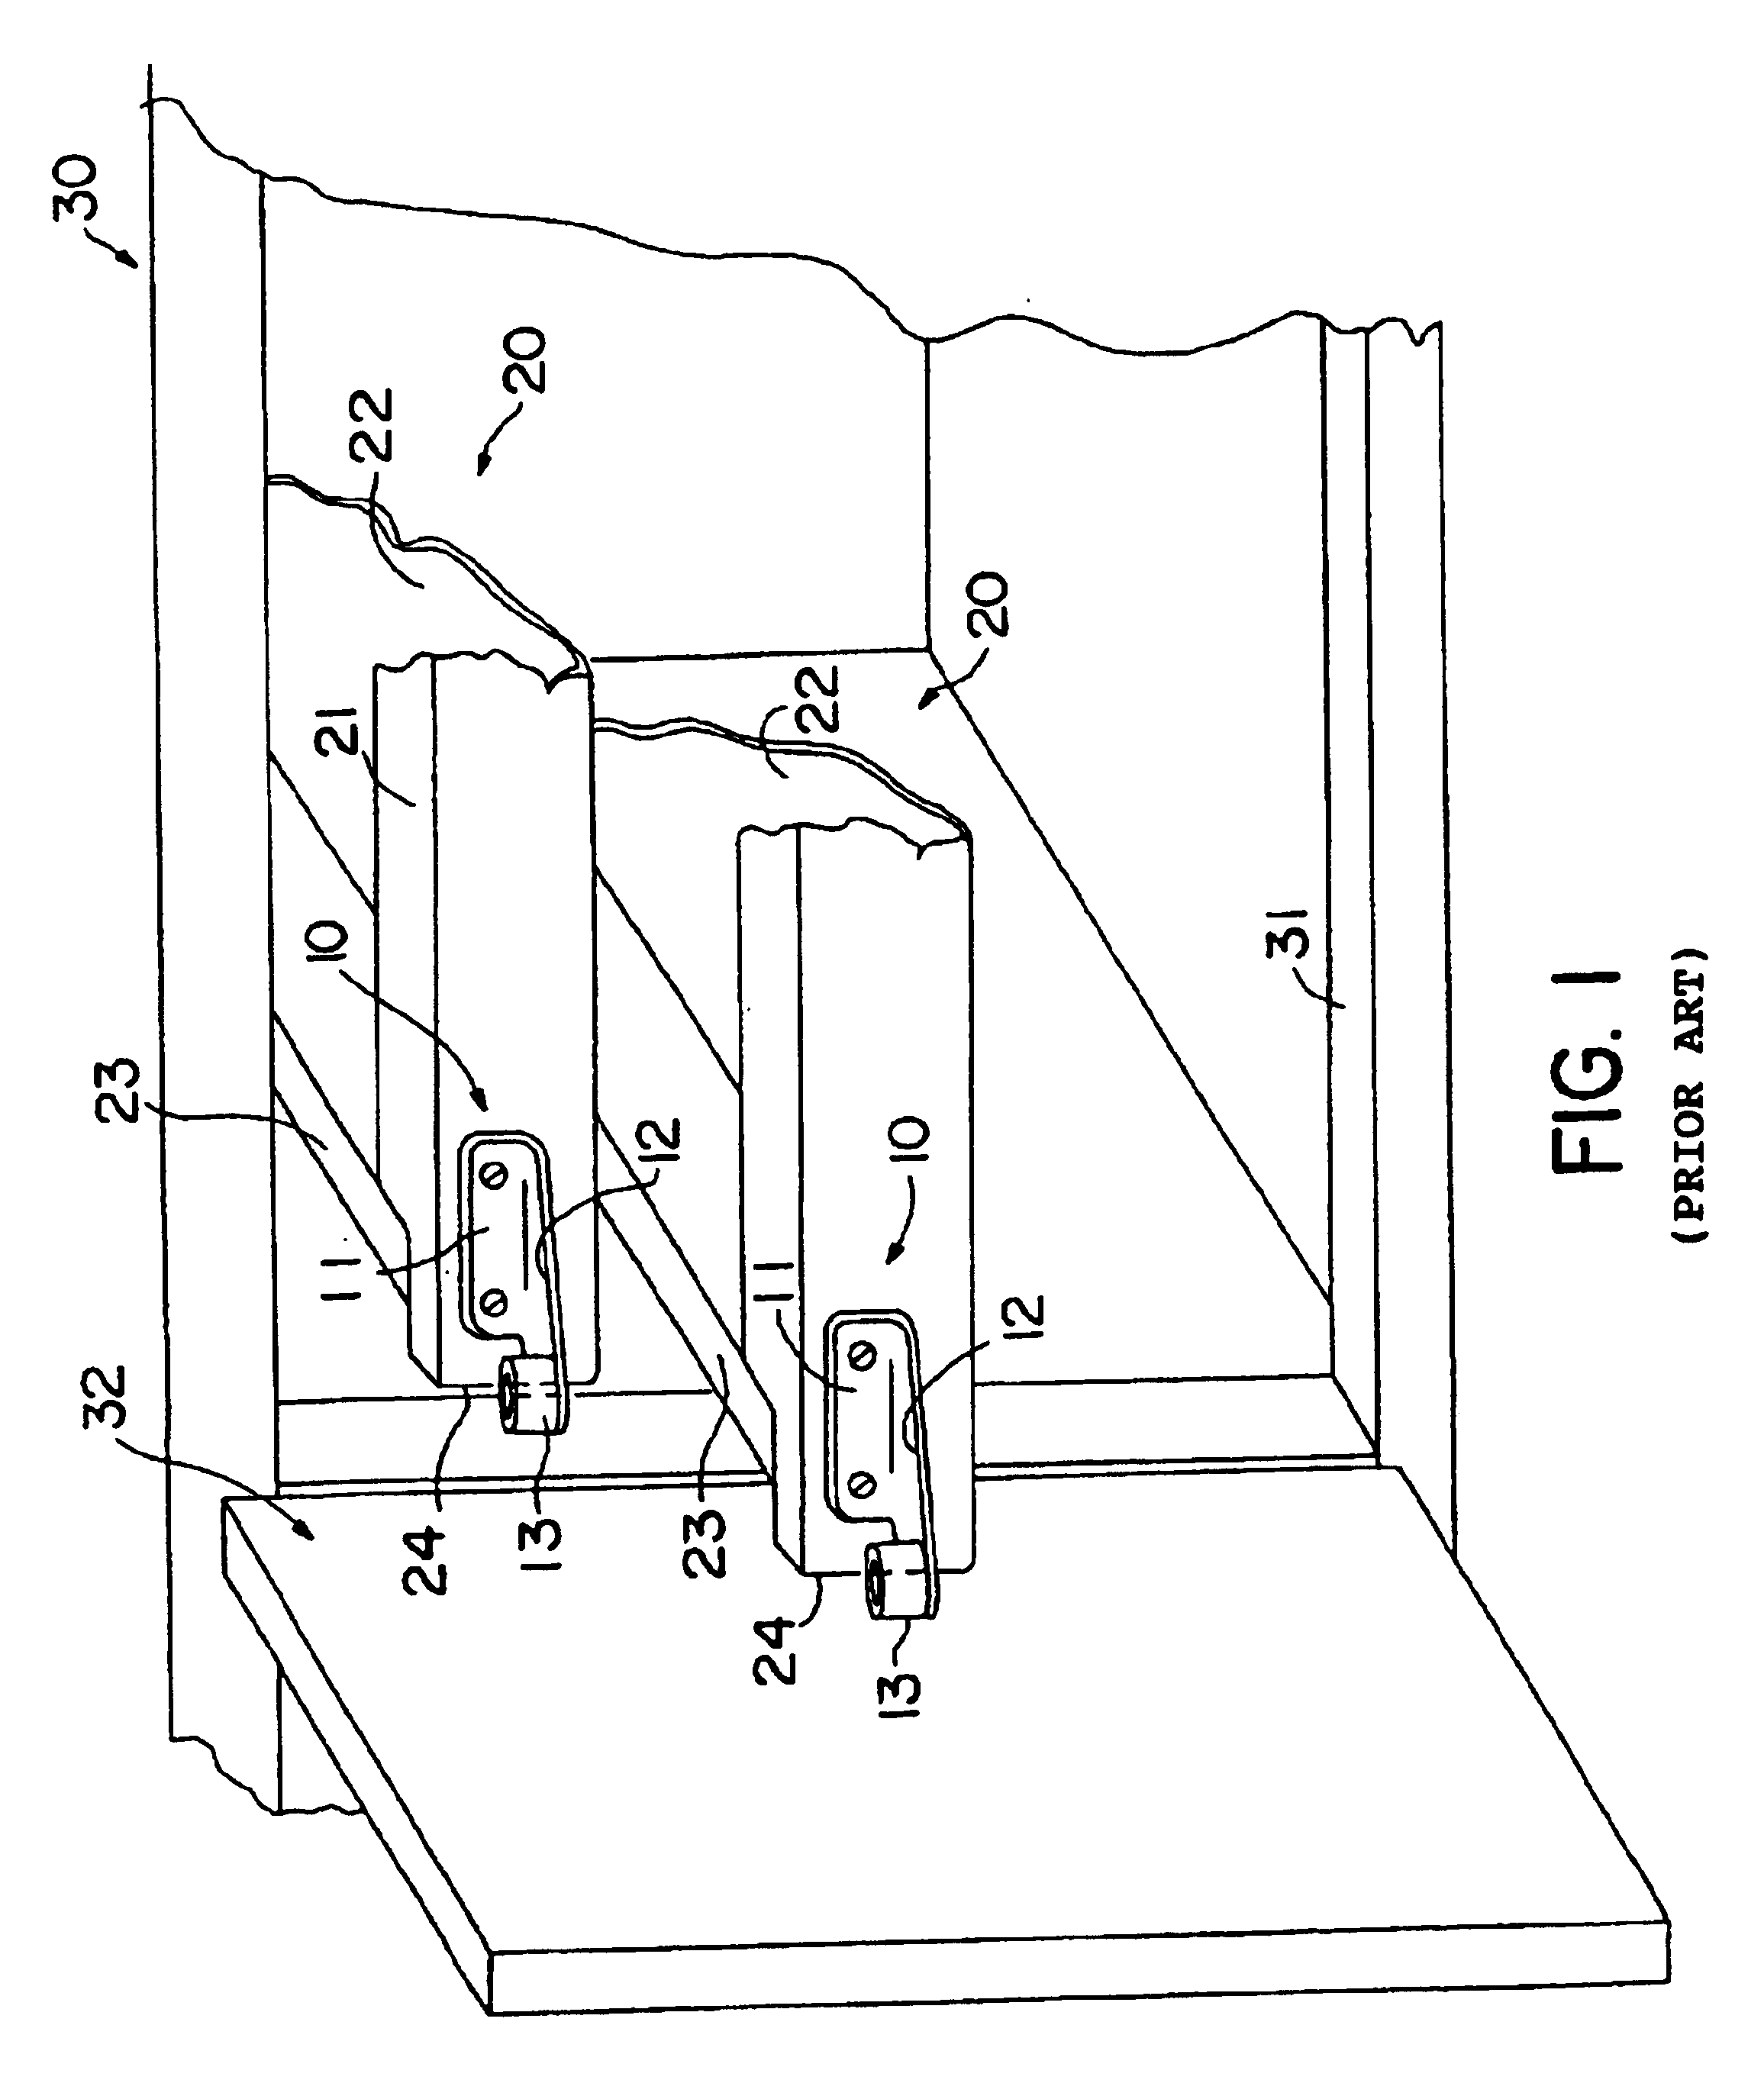 Drawer stop device with dual-side mountable roller